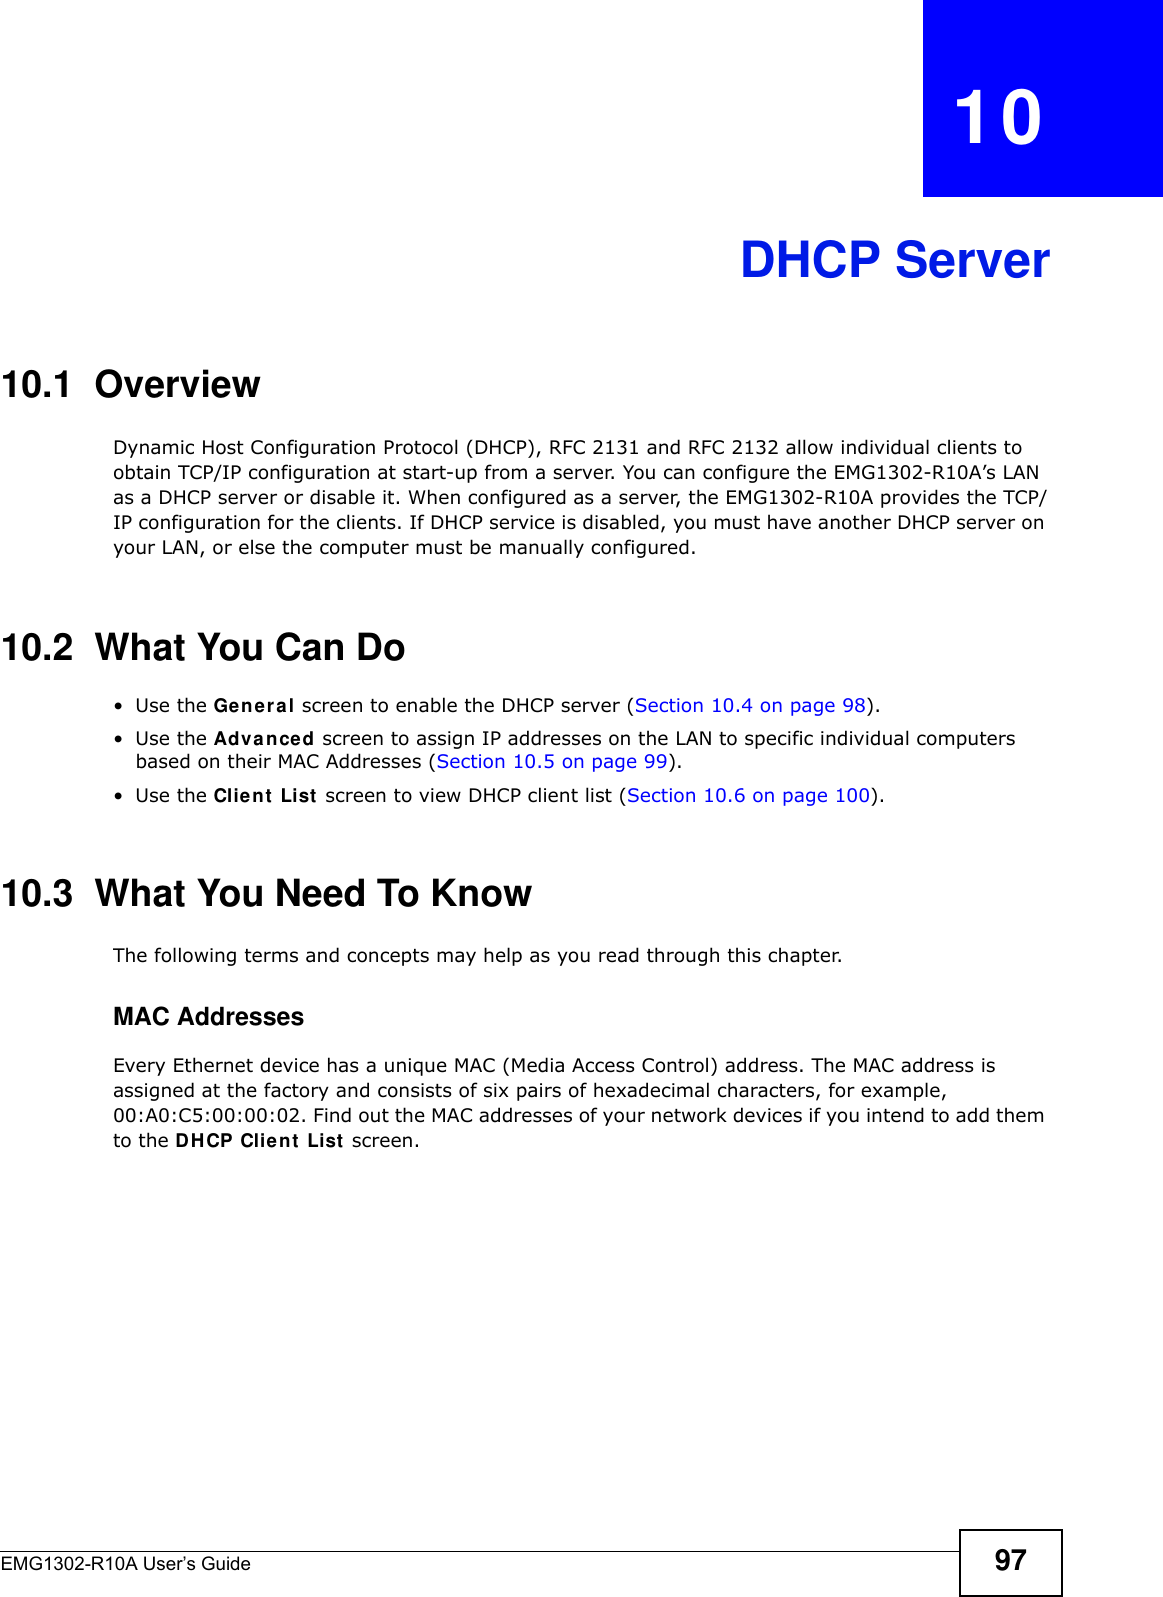 EMG1302-R10A User’s Guide 97CHAPTER   10DHCP Server10.1  OverviewDynamic Host Configuration Protocol (DHCP), RFC 2131 and RFC 2132 allow individual clients to obtain TCP/IP configuration at start-up from a server. You can configure the EMG1302-R10A’s LAN as a DHCP server or disable it. When configured as a server, the EMG1302-R10A provides the TCP/IP configuration for the clients. If DHCP service is disabled, you must have another DHCP server on your LAN, or else the computer must be manually configured.10.2  What You Can Do•Use the Ge n e r a l screen to enable the DHCP server (Section 10.4 on page 98).•Use the Adva nced screen to assign IP addresses on the LAN to specific individual computers based on their MAC Addresses (Section 10.5 on page 99).•Use the Clie n t  List  screen to view DHCP client list (Section 10.6 on page 100).10.3  What You Need To KnowThe following terms and concepts may help as you read through this chapter.MAC AddressesEvery Ethernet device has a unique MAC (Media Access Control) address. The MAC address is assigned at the factory and consists of six pairs of hexadecimal characters, for example, 00:A0:C5:00:00:02. Find out the MAC addresses of your network devices if you intend to add them to the DH CP Client List screen.